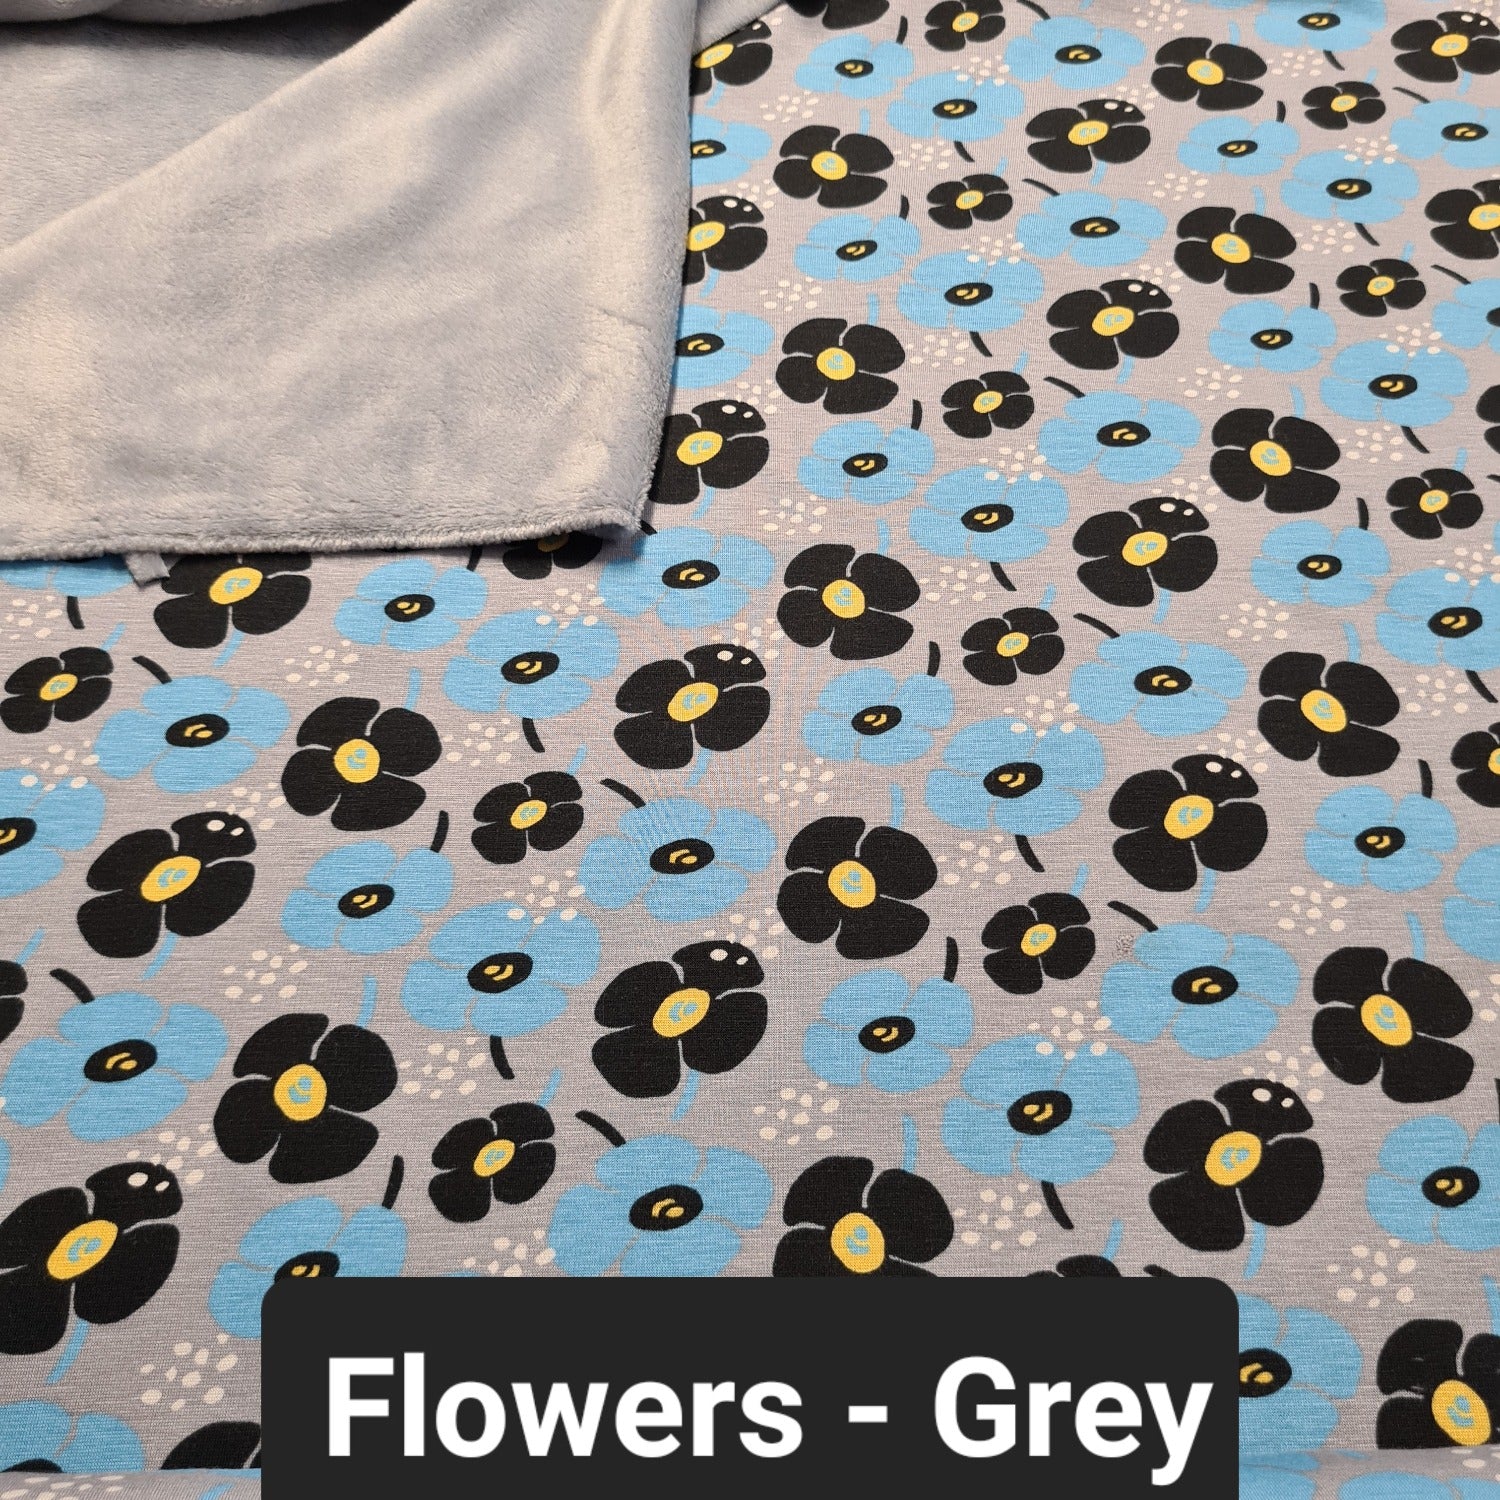 Grey fleece with black and blue flowers